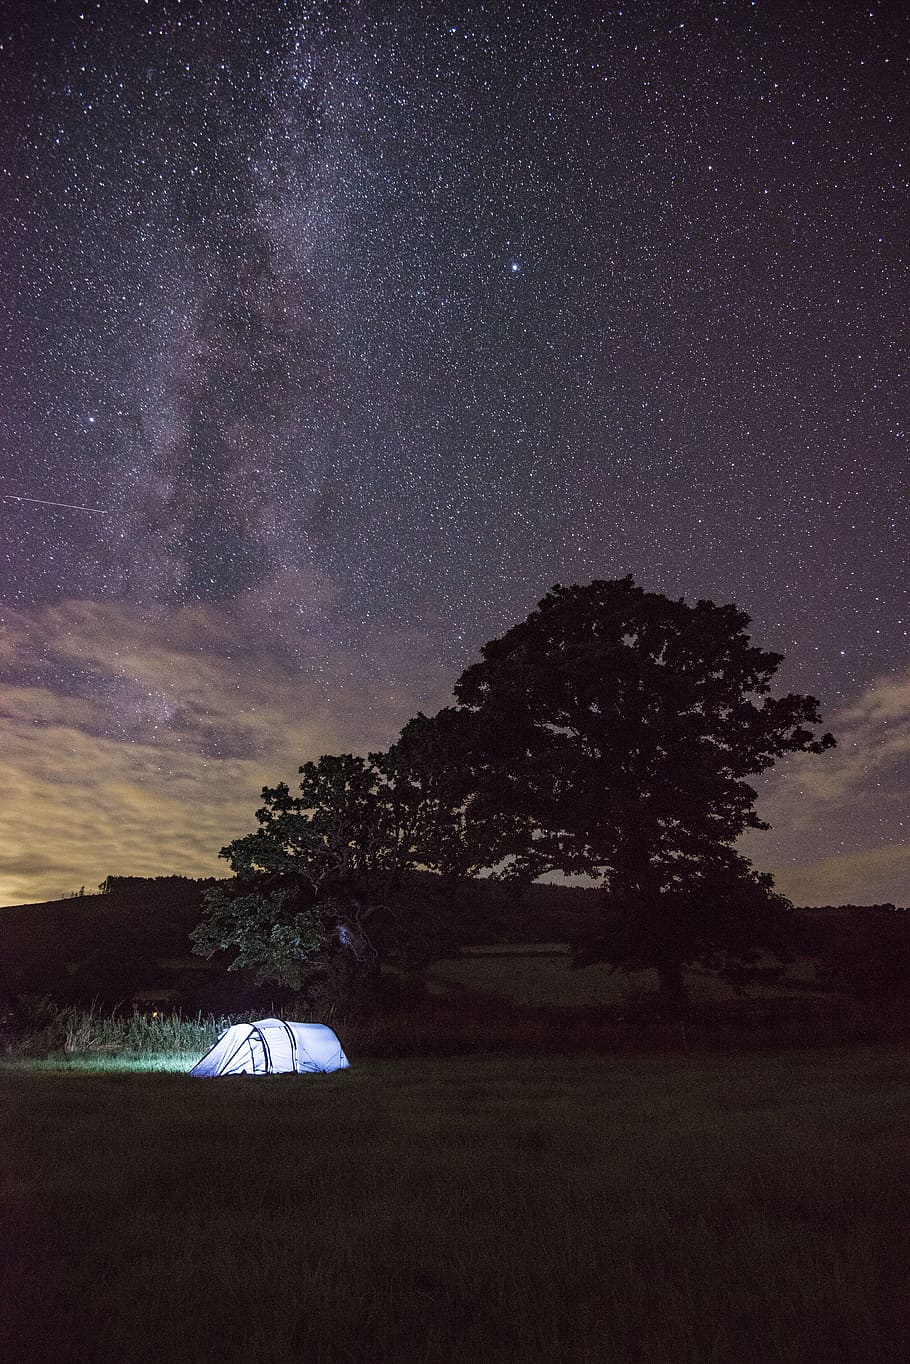 landscape, tree, nature, sky, milky way, tent, camping, hiking